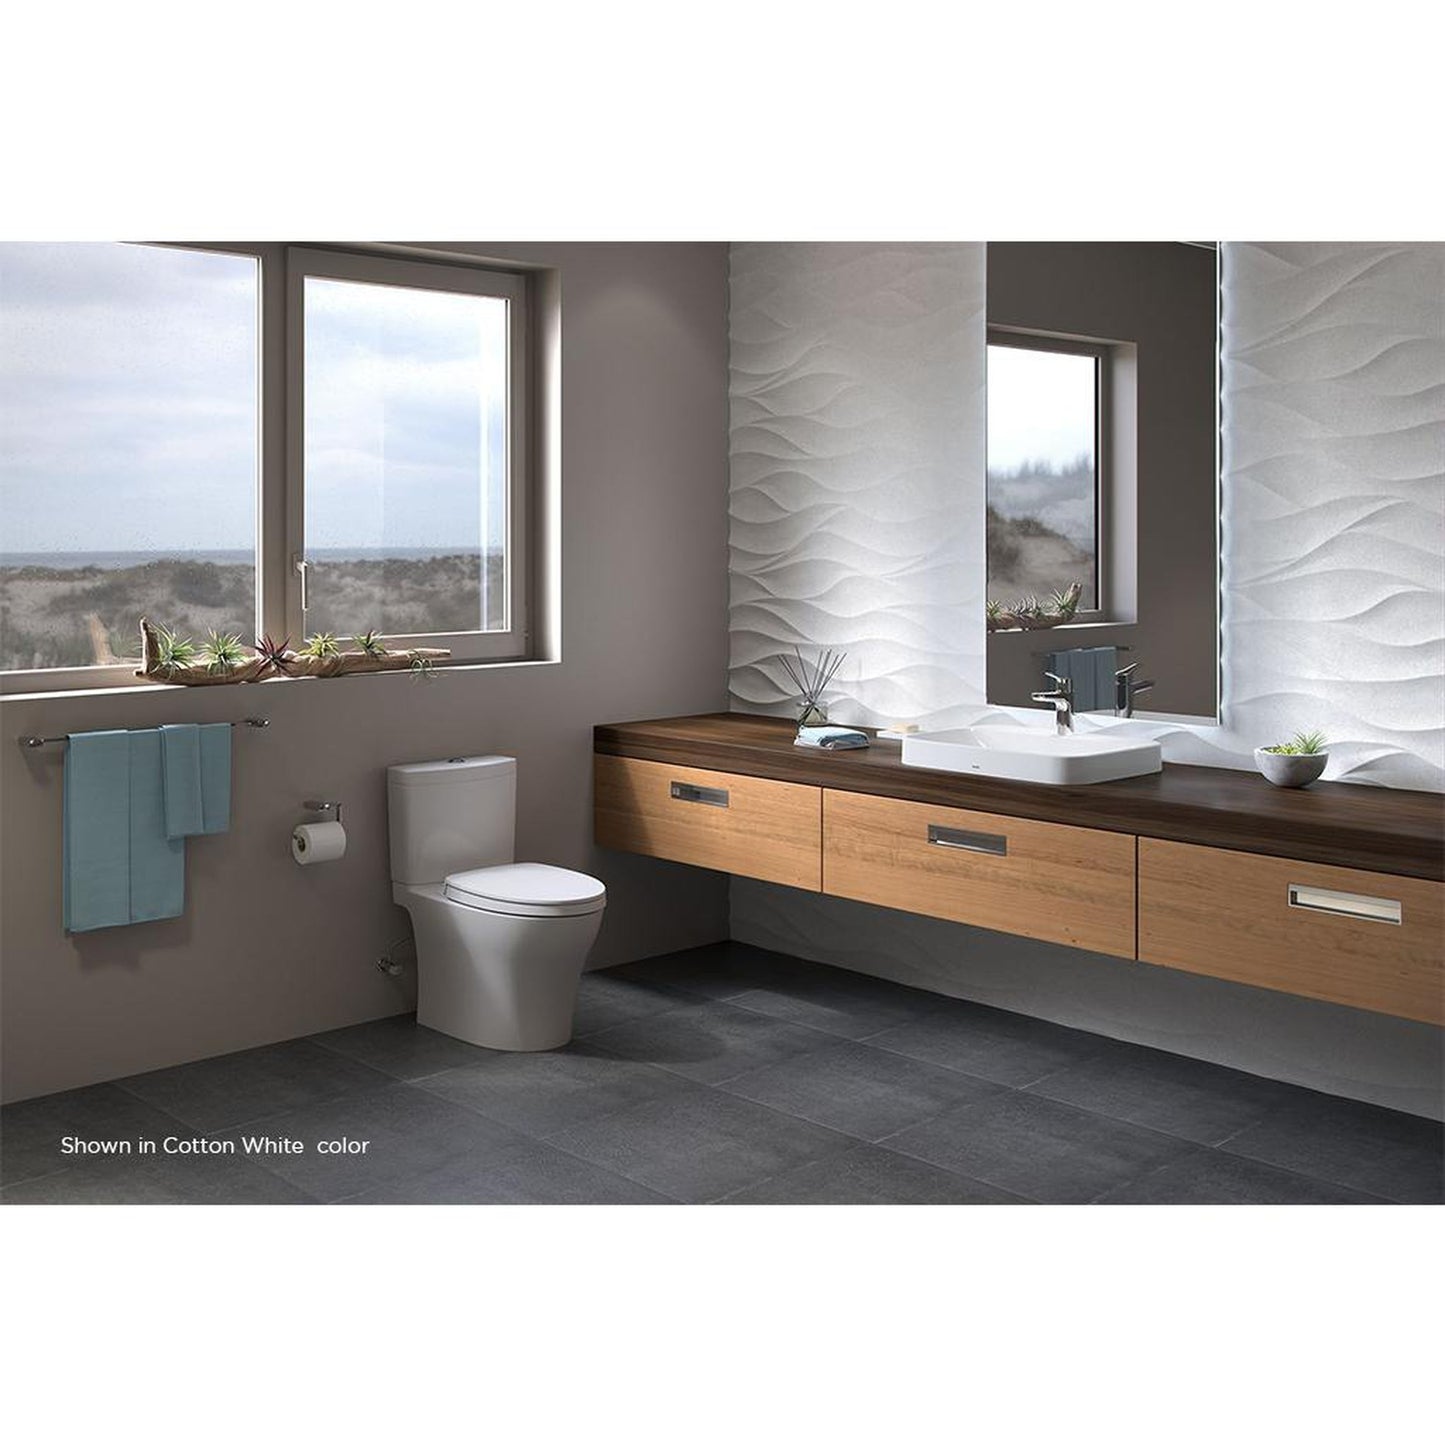 TOTO Aquia IV Sedona Beige 1.0 GPF & 0.8 GPF Dual-Flush Two-Piece Elongated Toilet With WASHLET+ Connection - SoftClose Seat Included